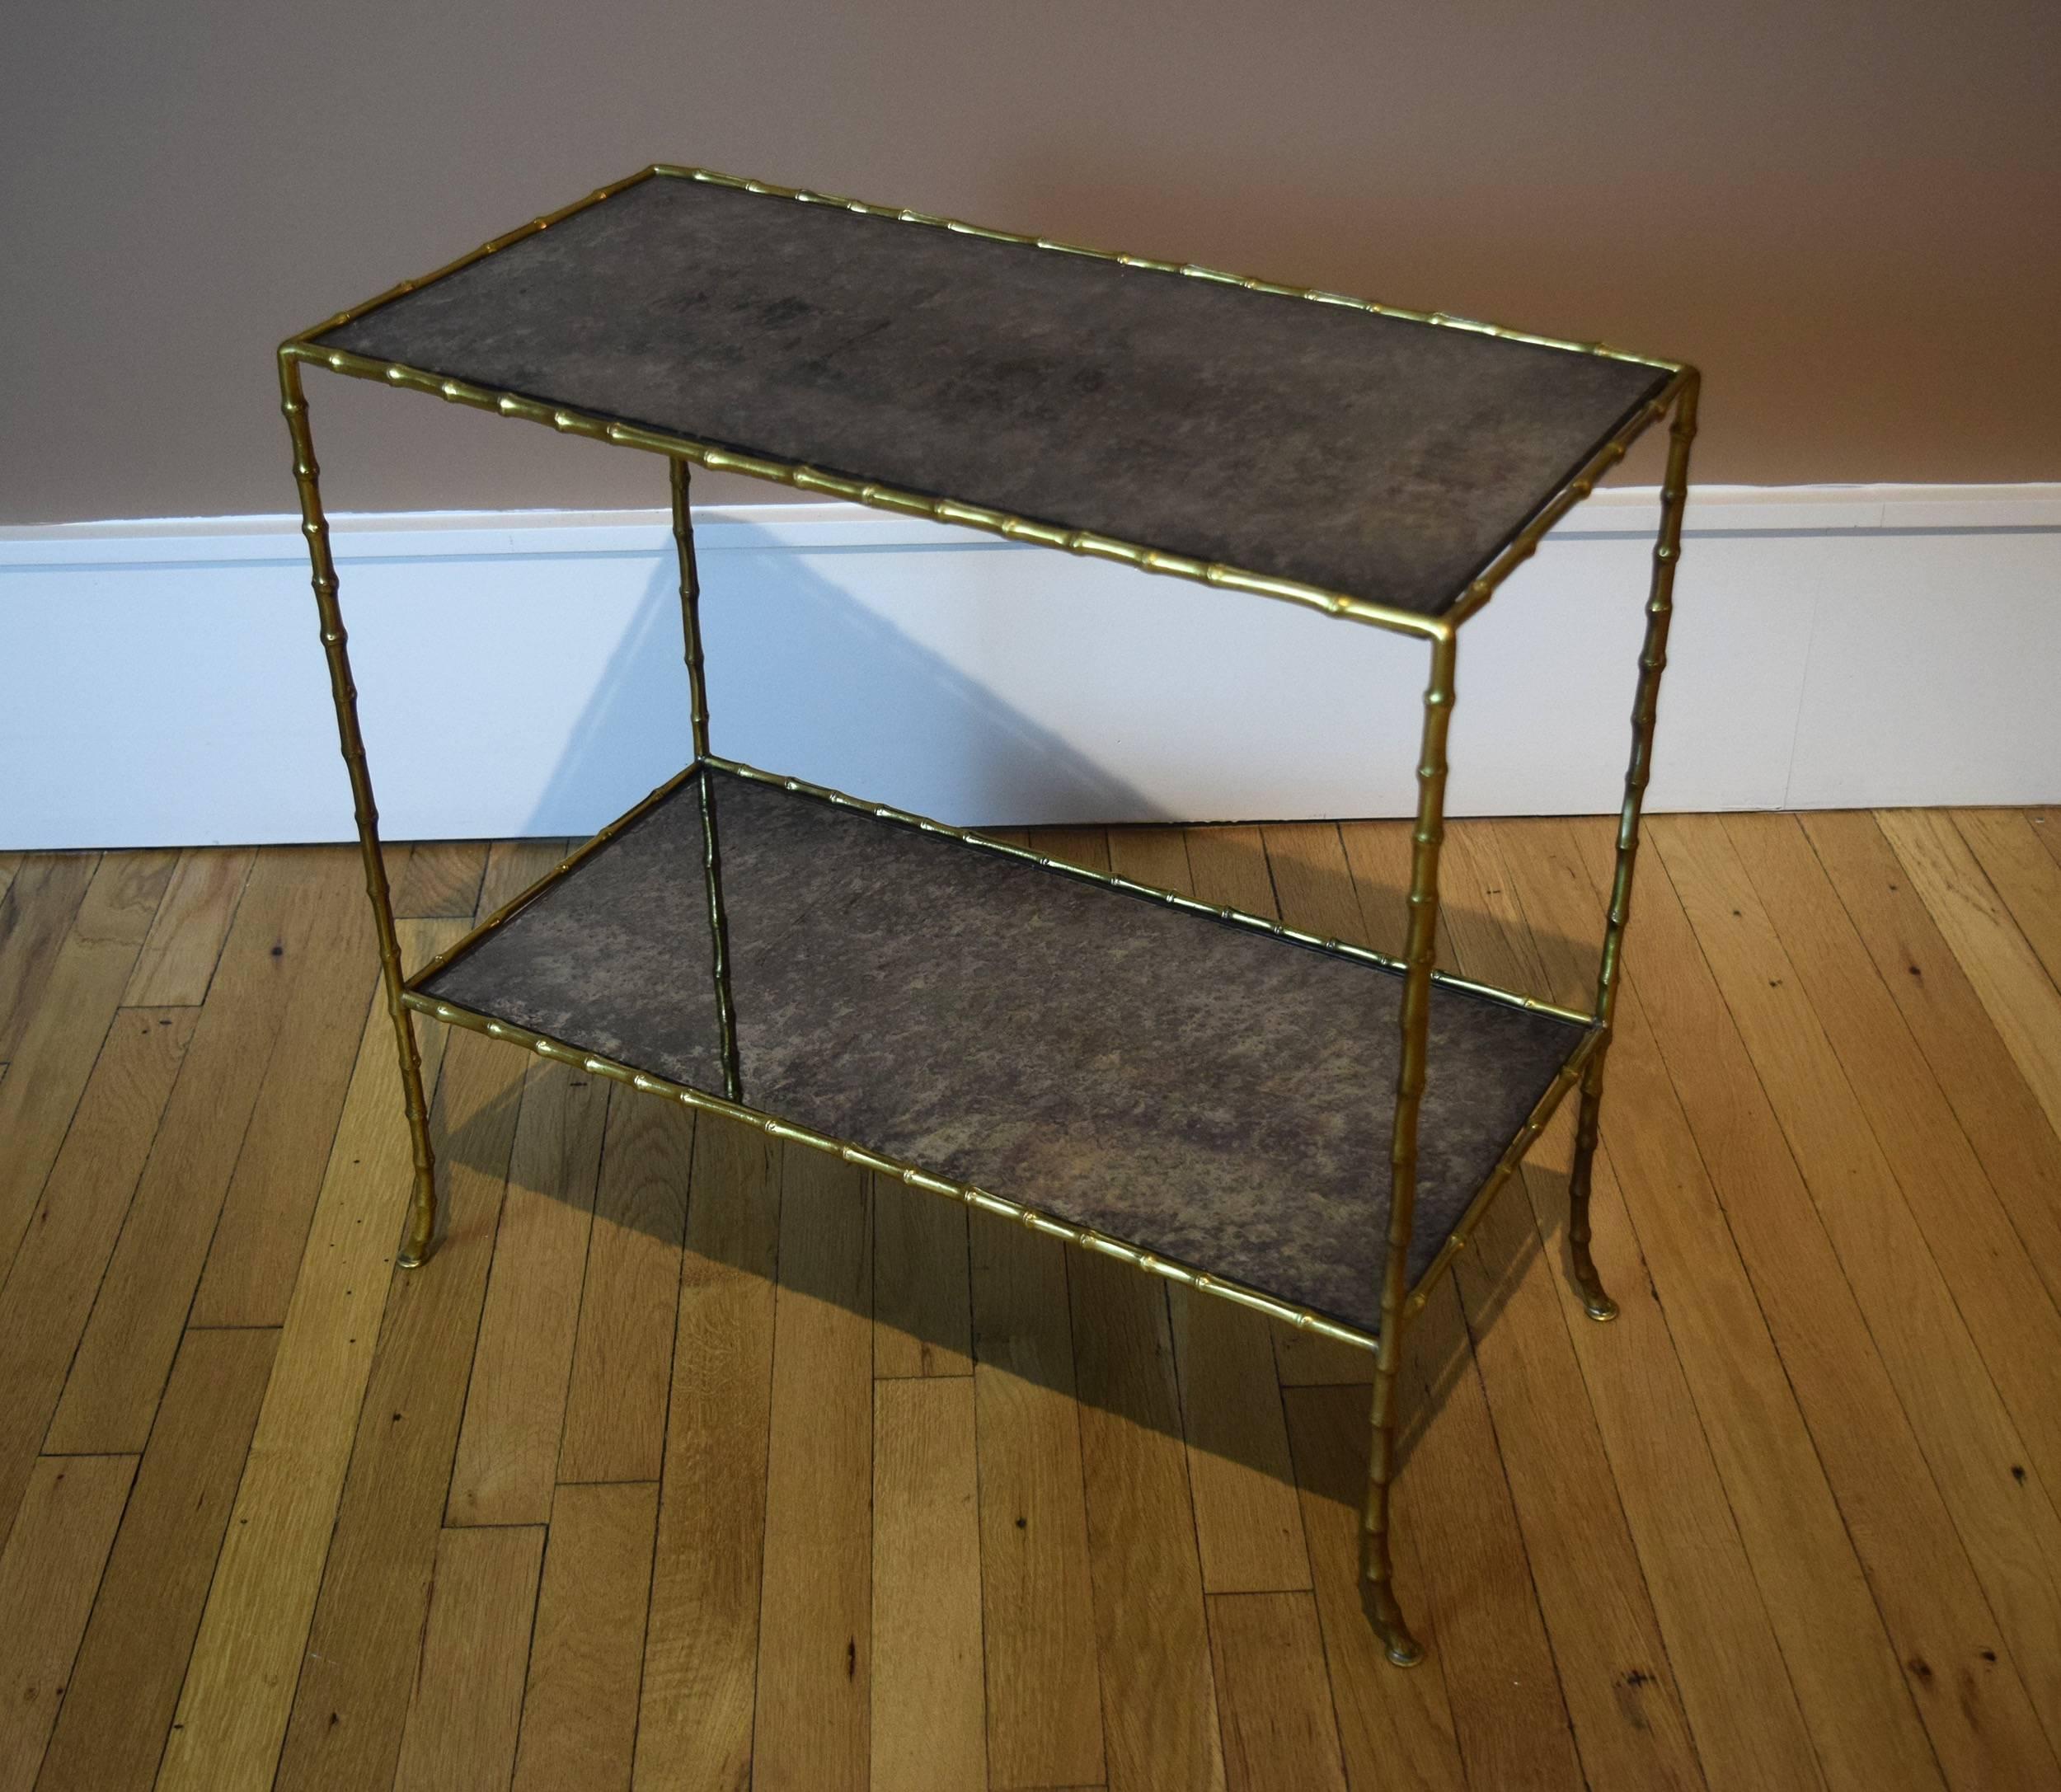 This gilt bronze side table by Baguès has its original, antiqued-mirror plates. It was made by the celebrated Paris bronzier, circa 1950.